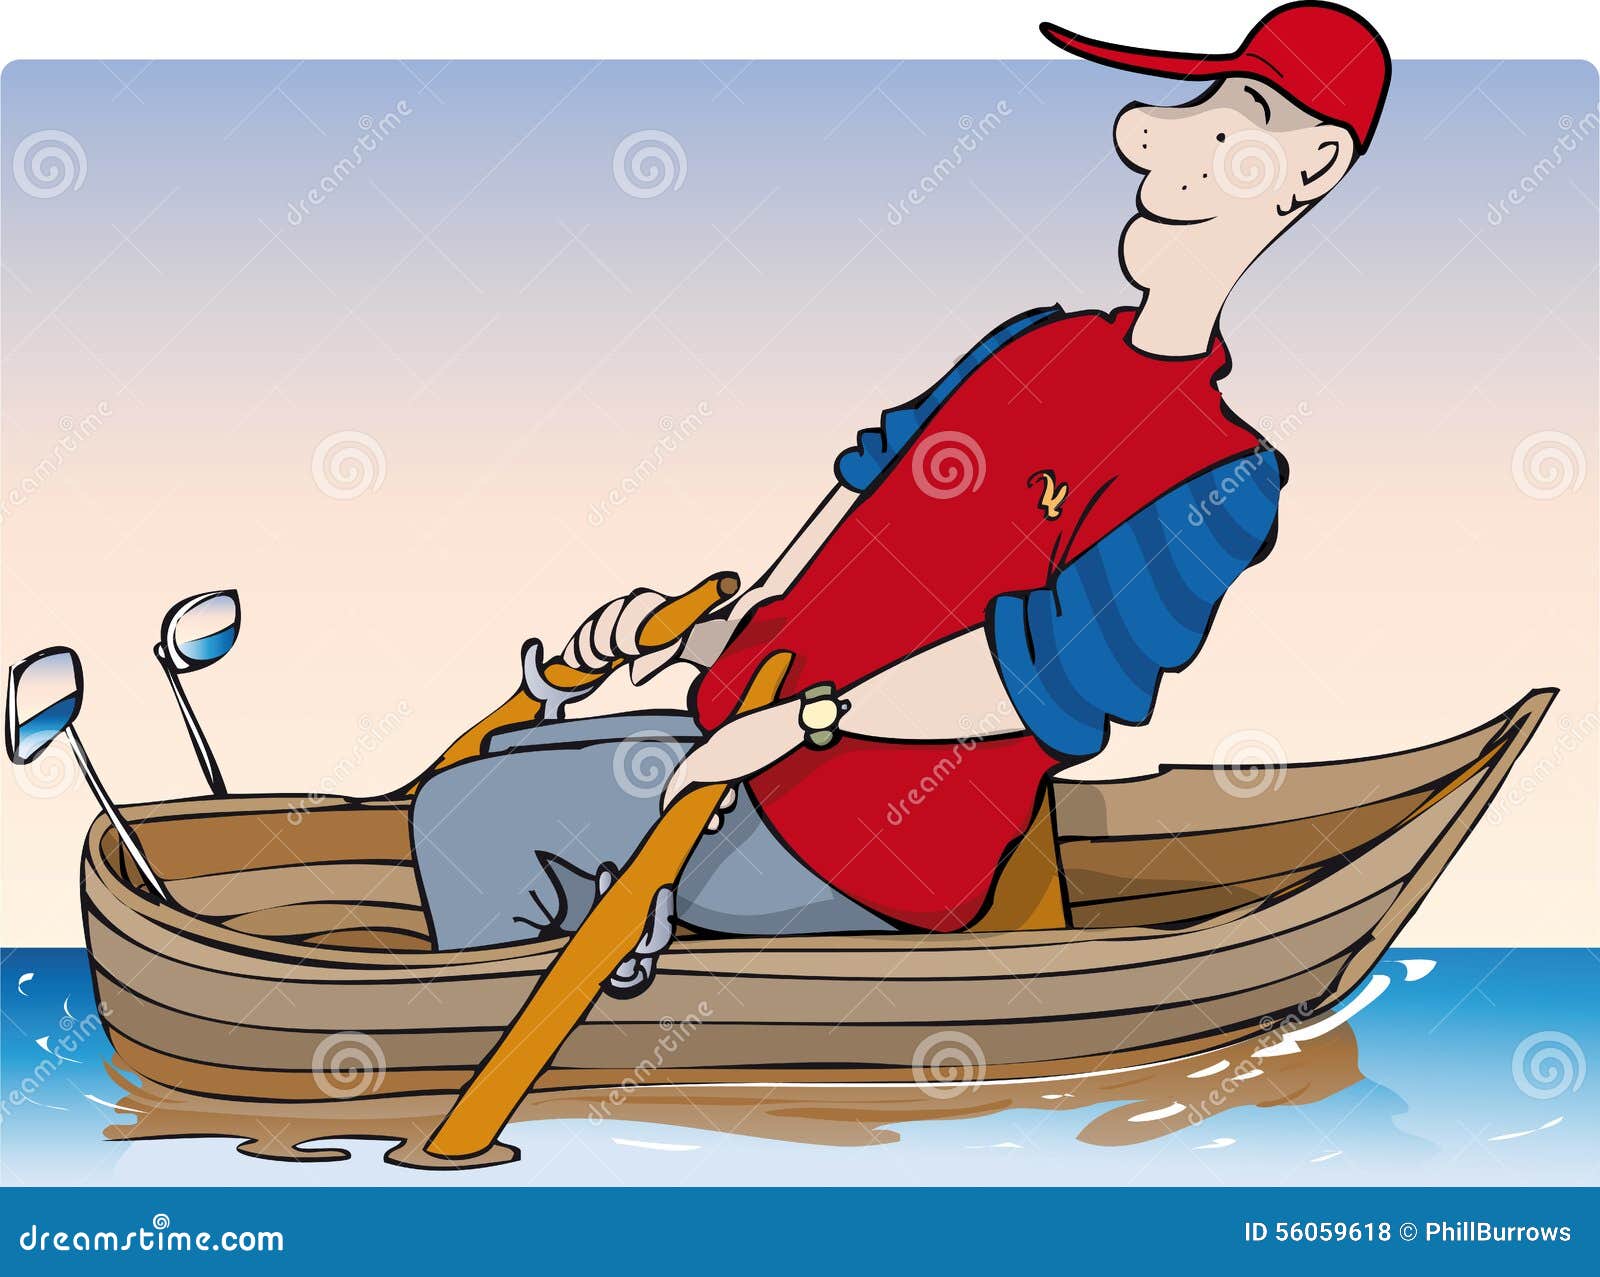 Rowing Invention Stock Vector - Image: 56059618